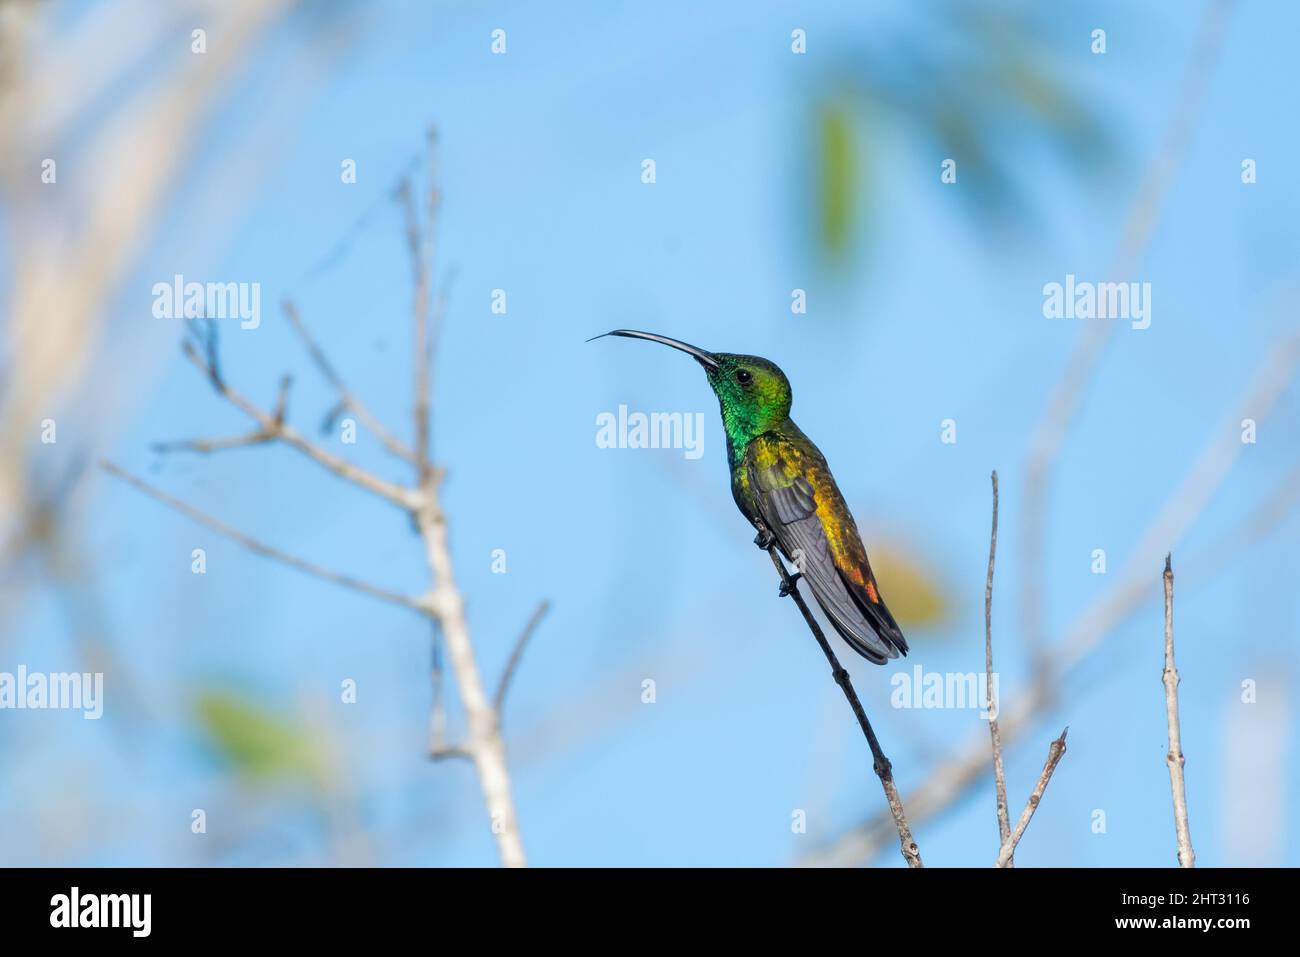 Male Green-throated Mango hummingbird, Anthracothorax viridigula,  perched and resting in dry branches with his tongue out. Stock Photo